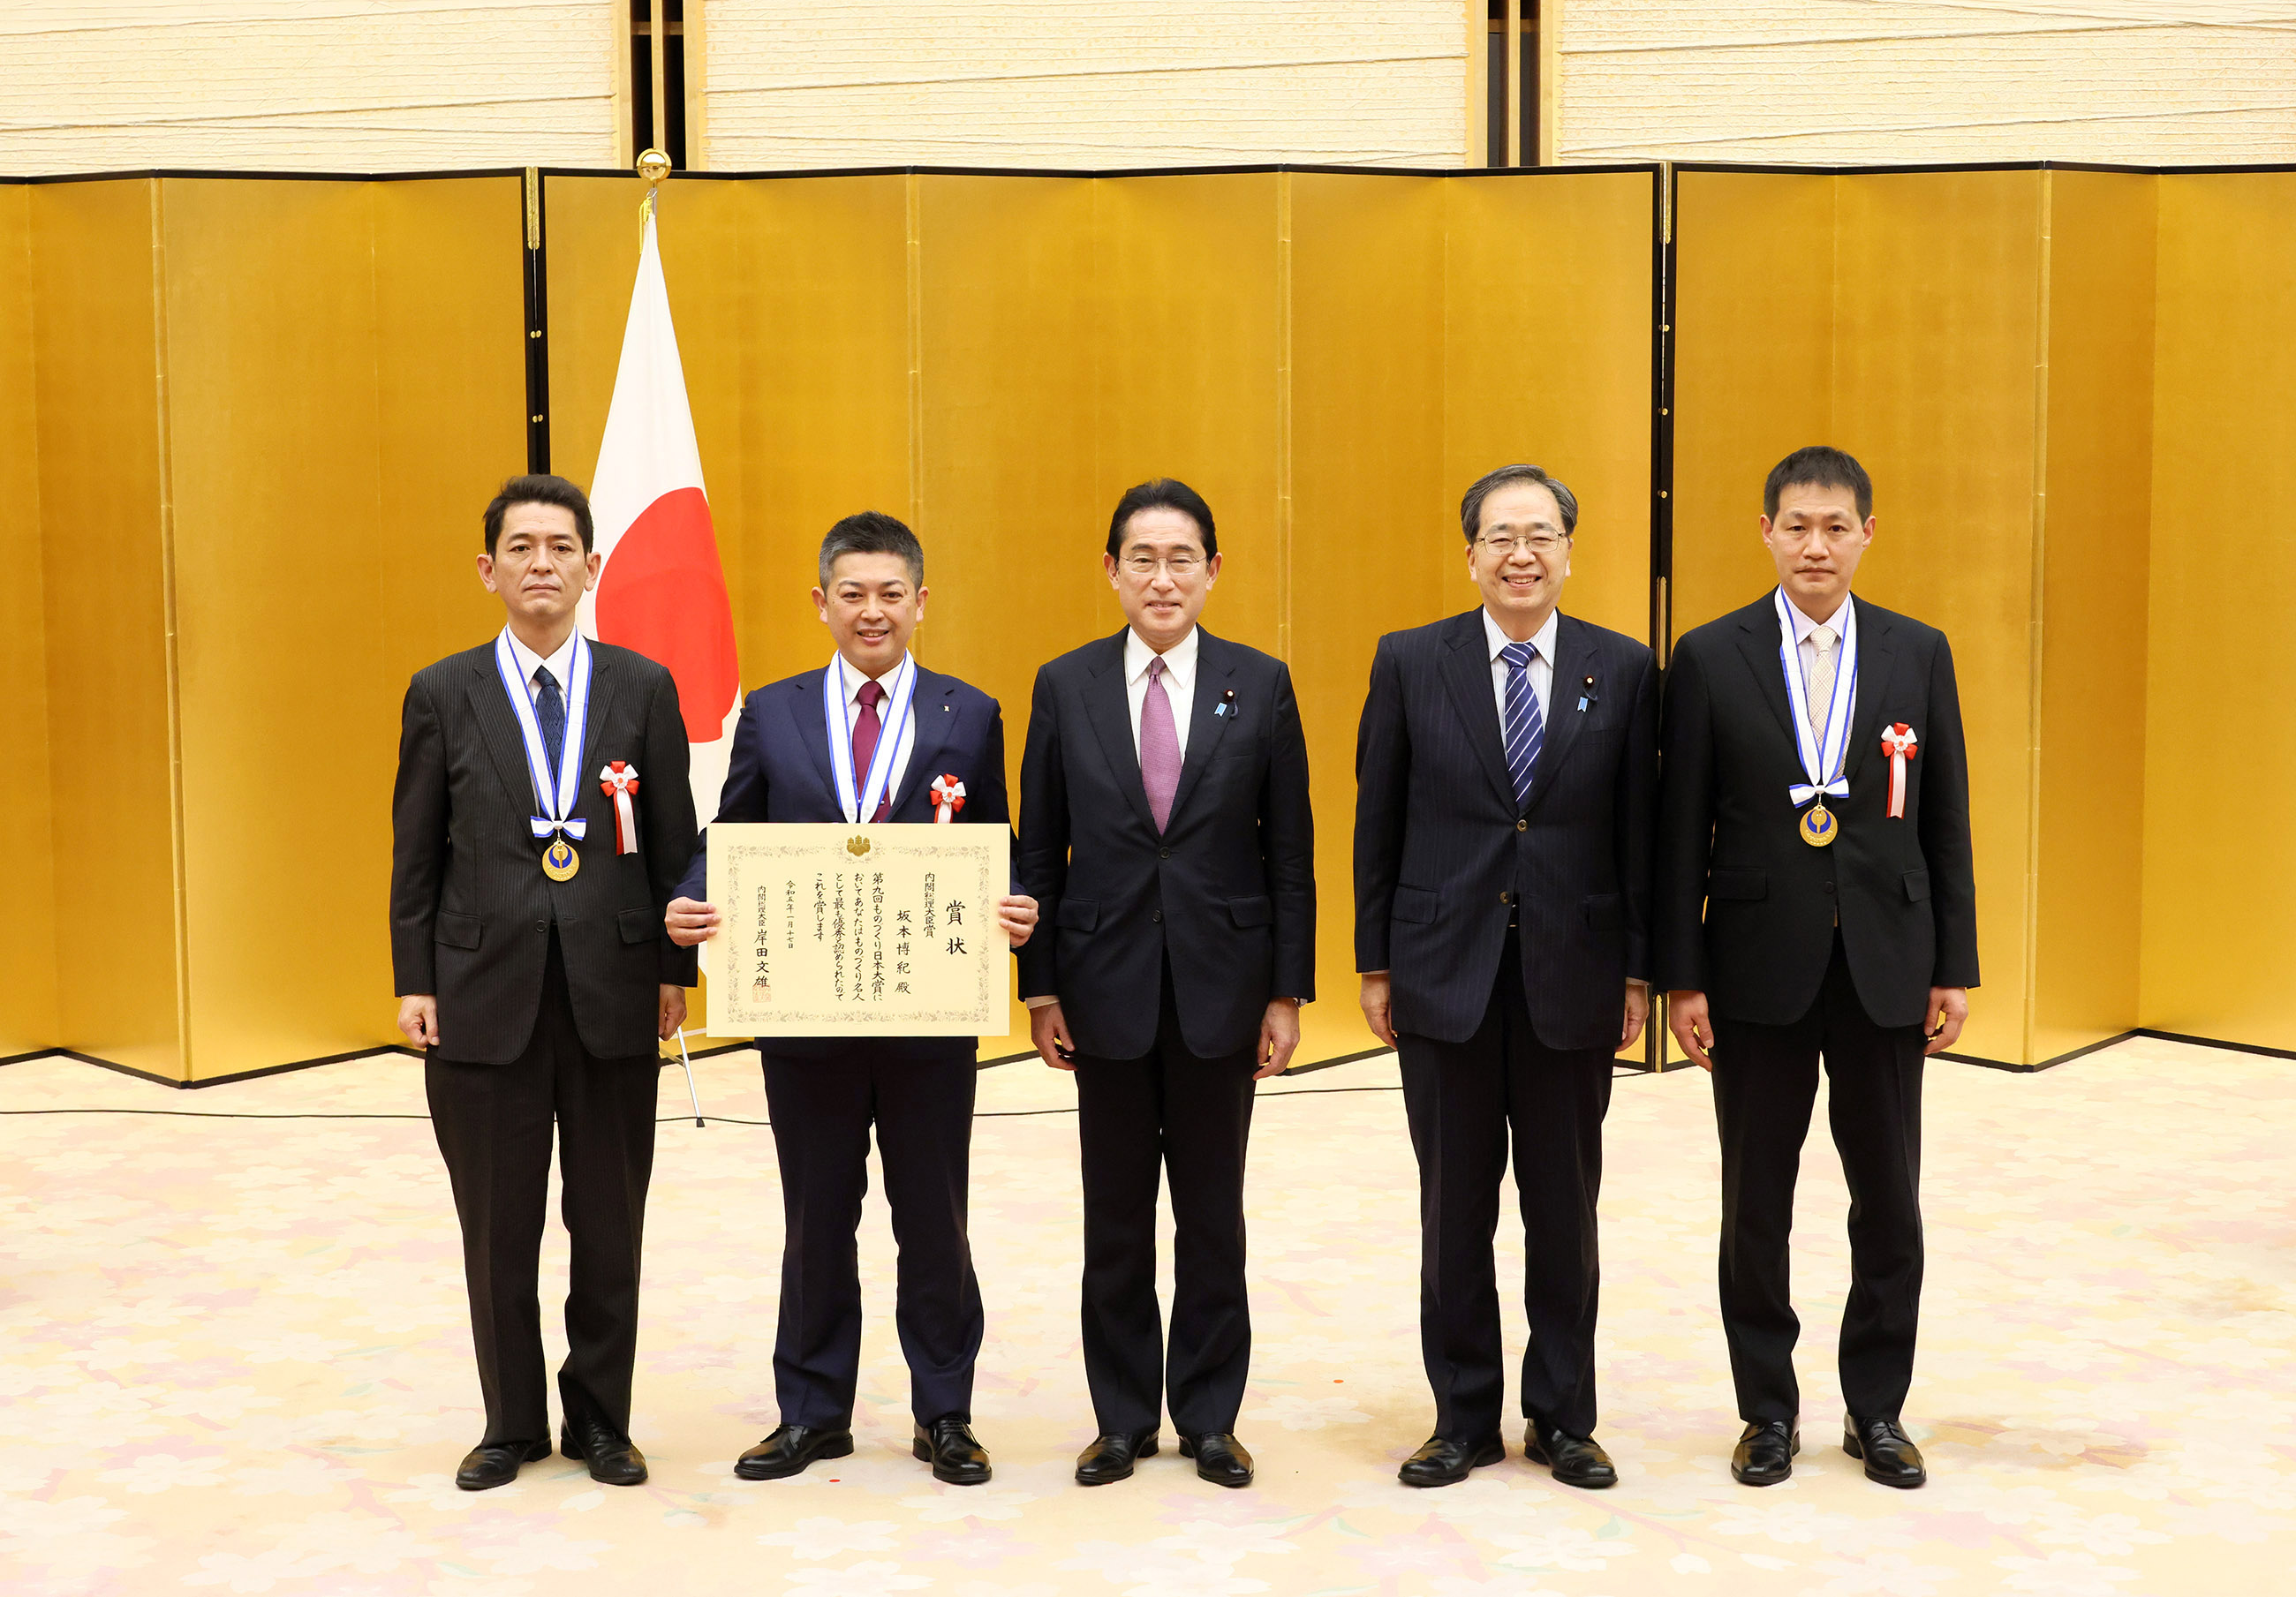 Commemorative photo session with award winners (3)